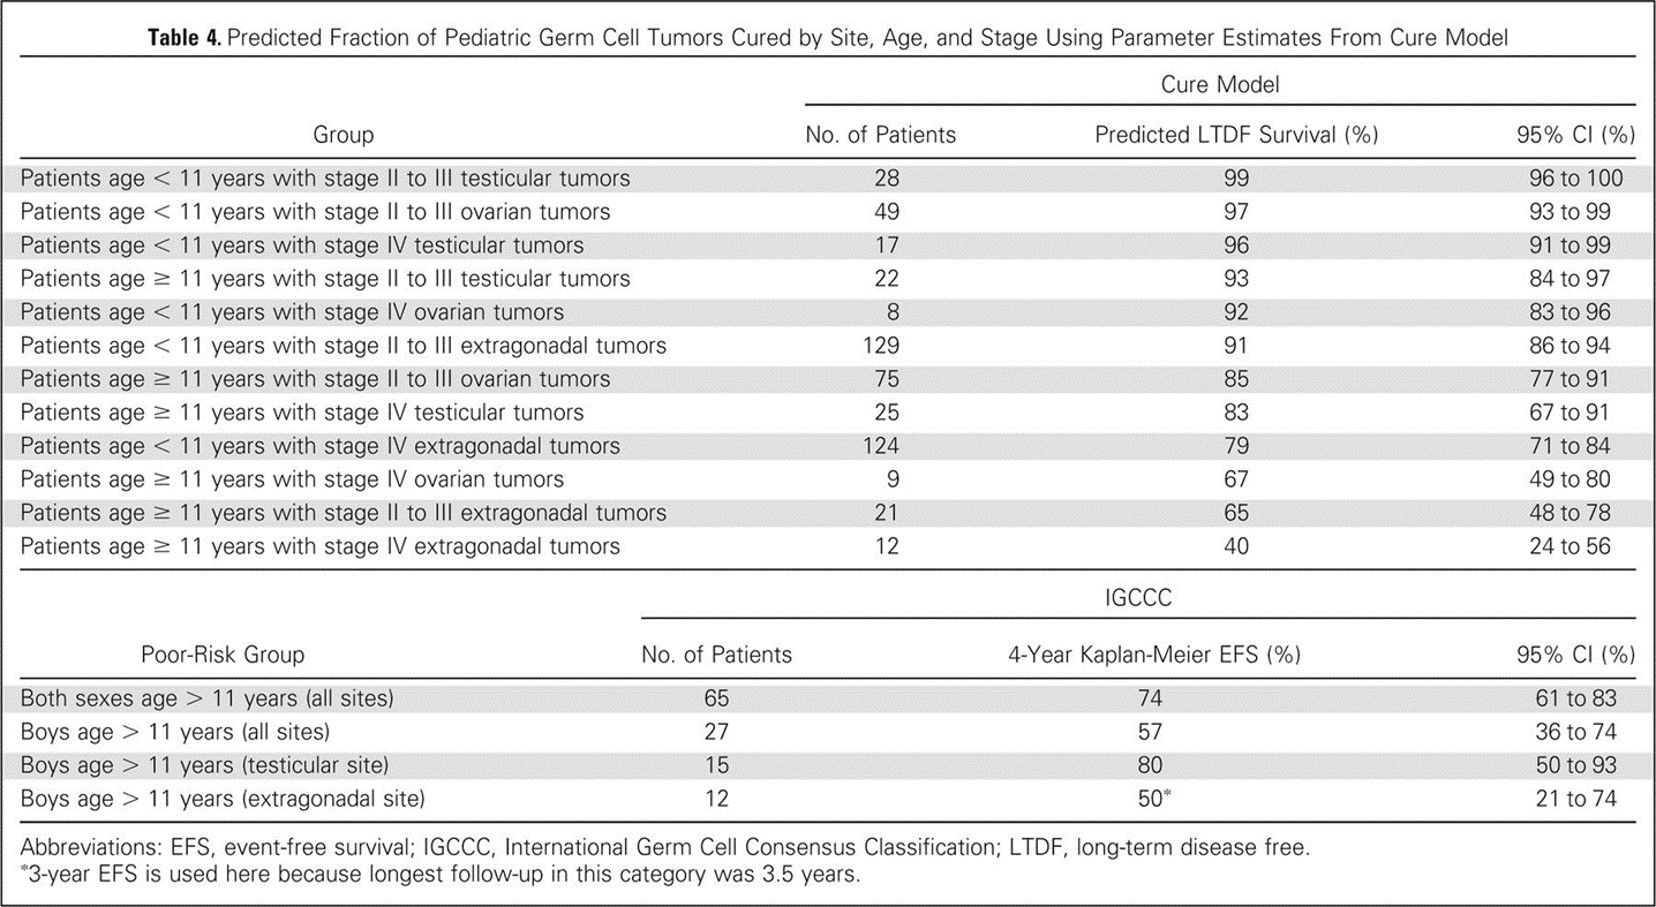 Table showing the predicted fraction of pediatric germ cell tumors cured by site, age, and stage using parameter estimates from Cure model.